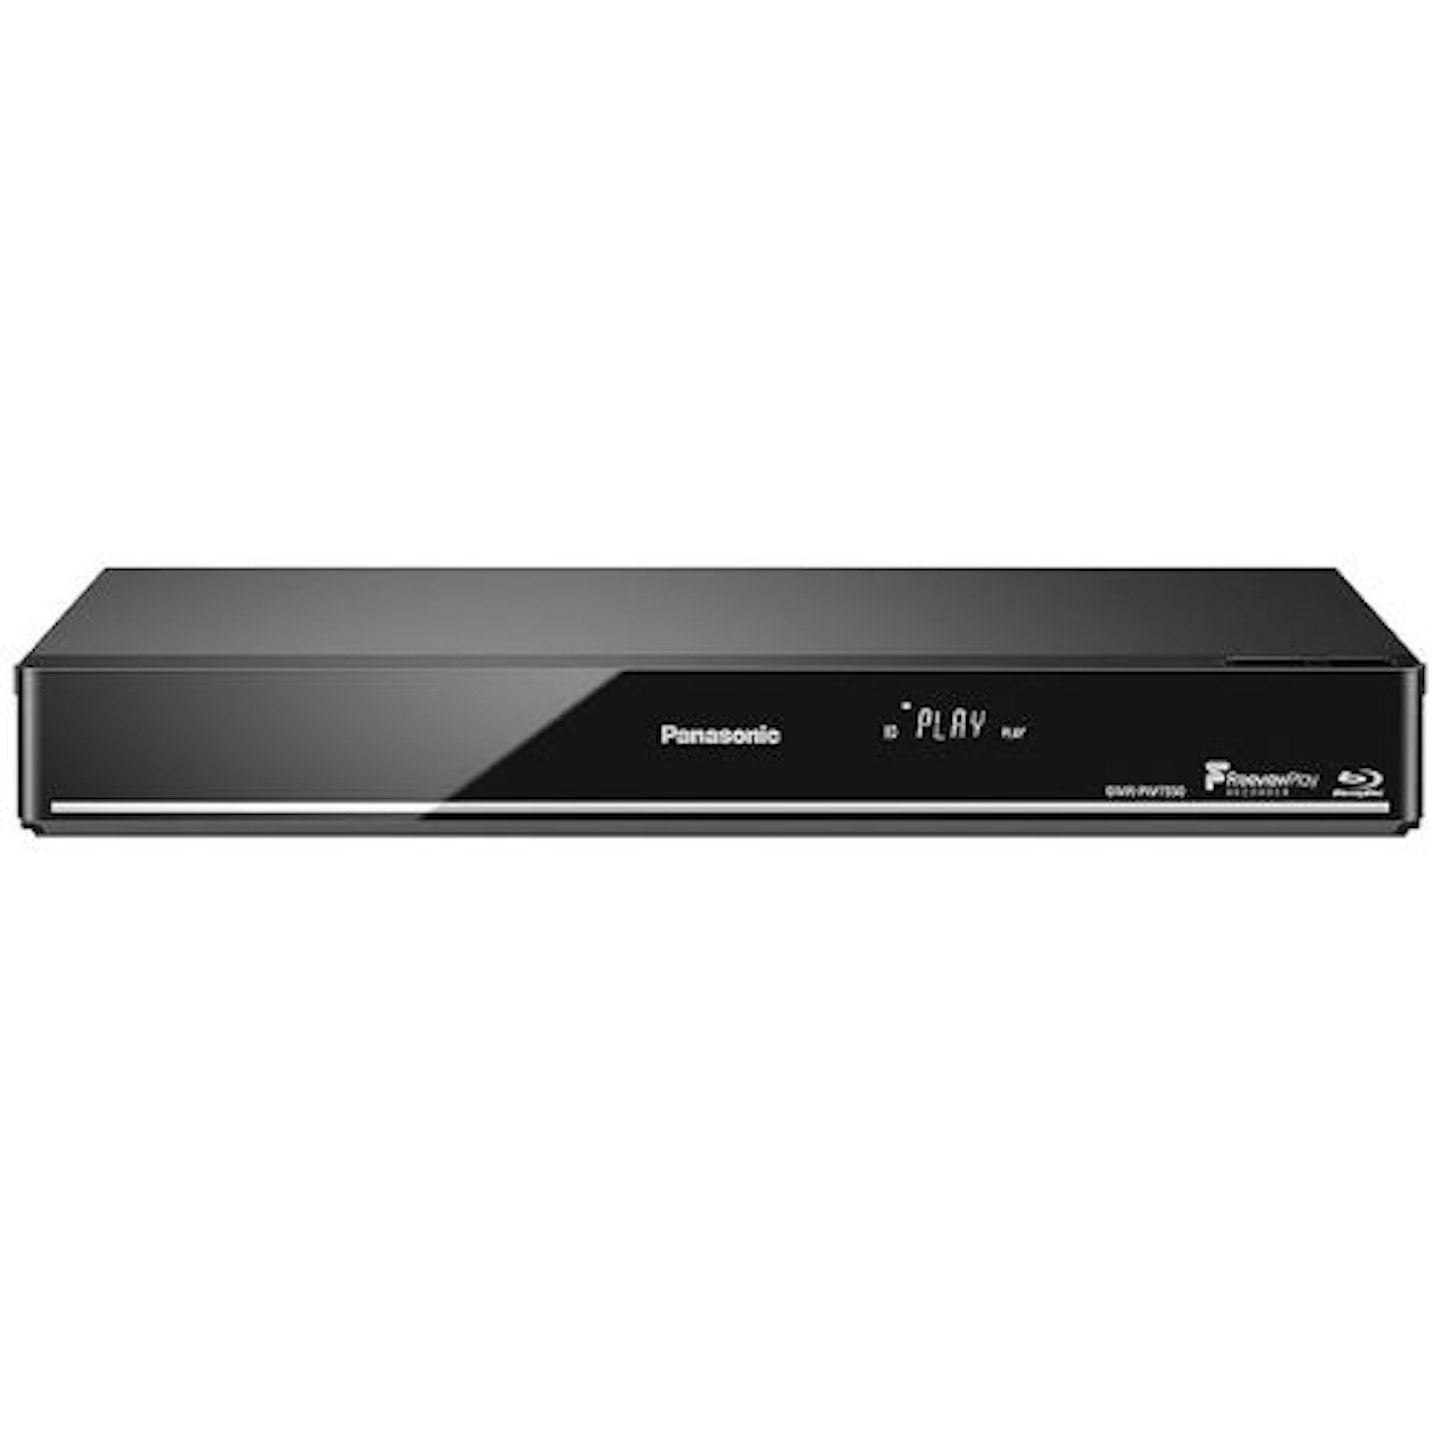 Panasonic DMR-PWT550EB Blu-Ray Player and HDD Recorder with Freeview Play